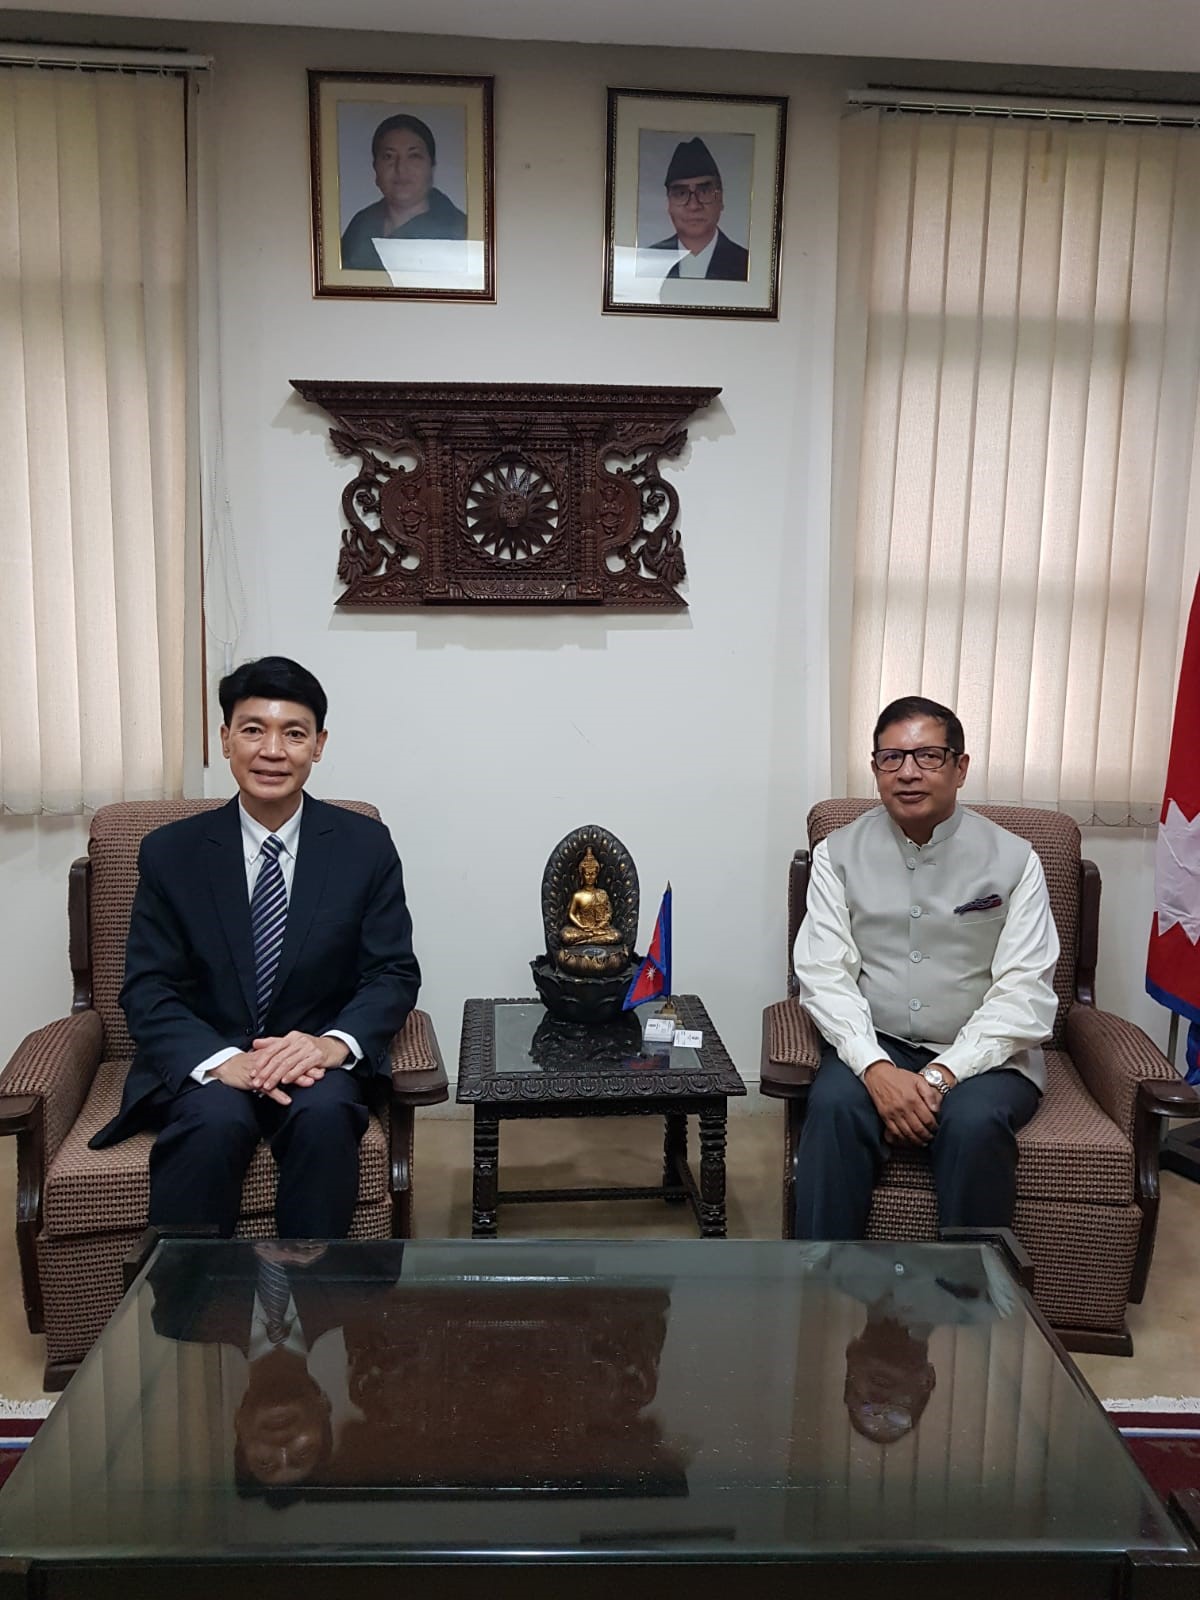 COURTESY VISIT OF THE SECRETARY-GENERAL OF AALCO TO THE EMBASSY OF NEPAL, NEW DELHI